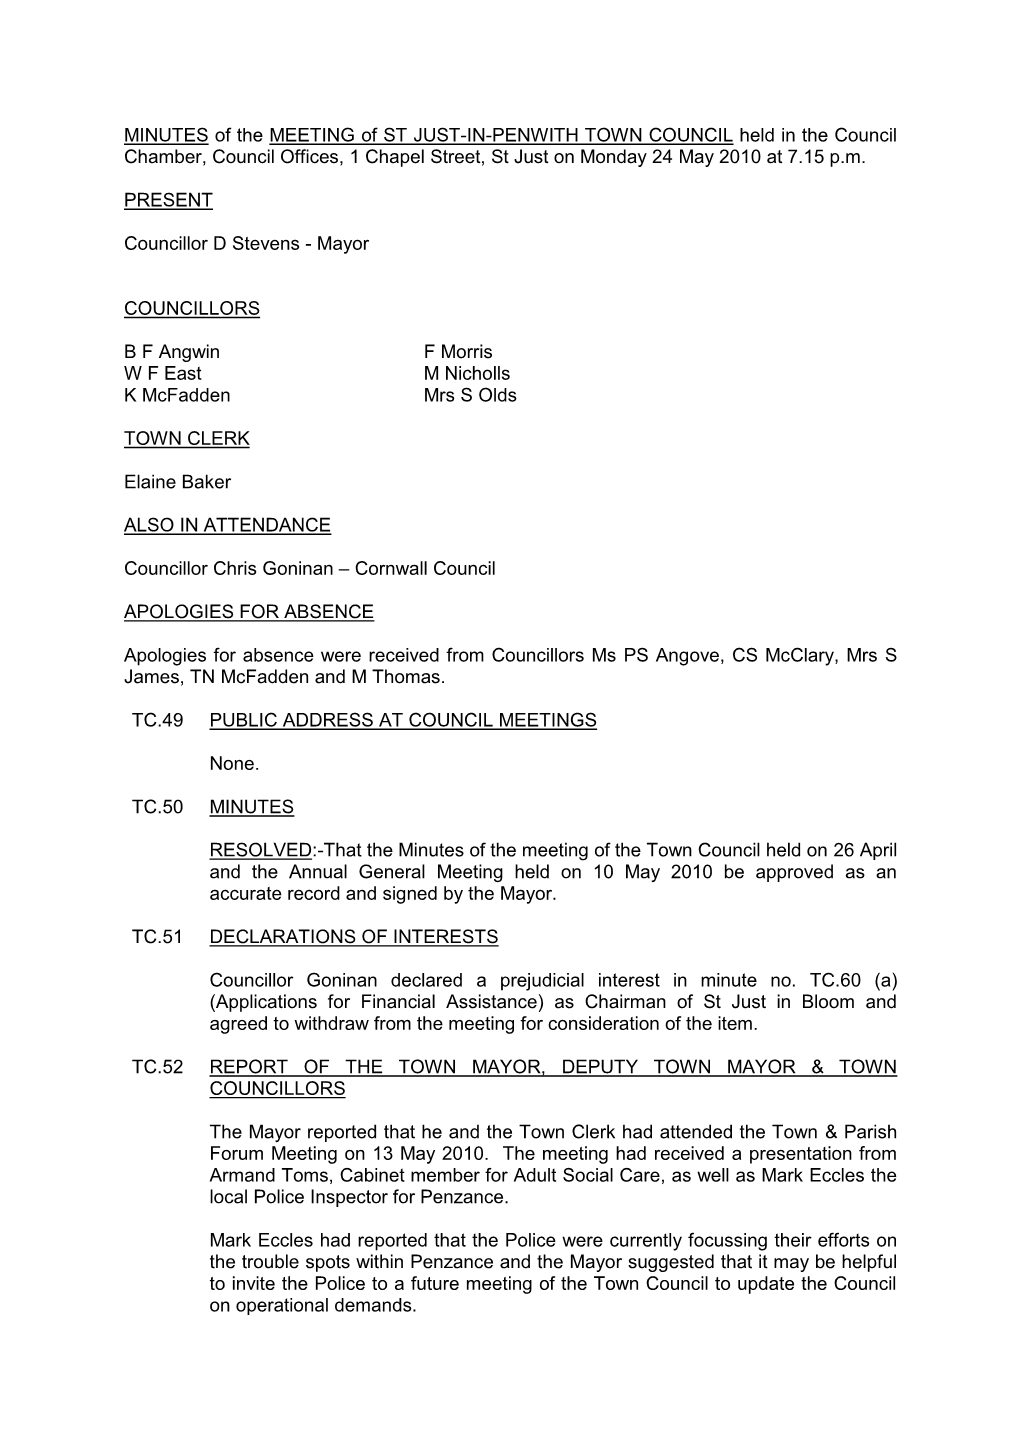 MINUTES of the MEETING of ST JUST-IN-PENWITH TOWN COUNCIL Held in the Council Chamber, Council Offices, 1 Chapel Street, St Just on Monday 24 May 2010 at 7.15 P.M